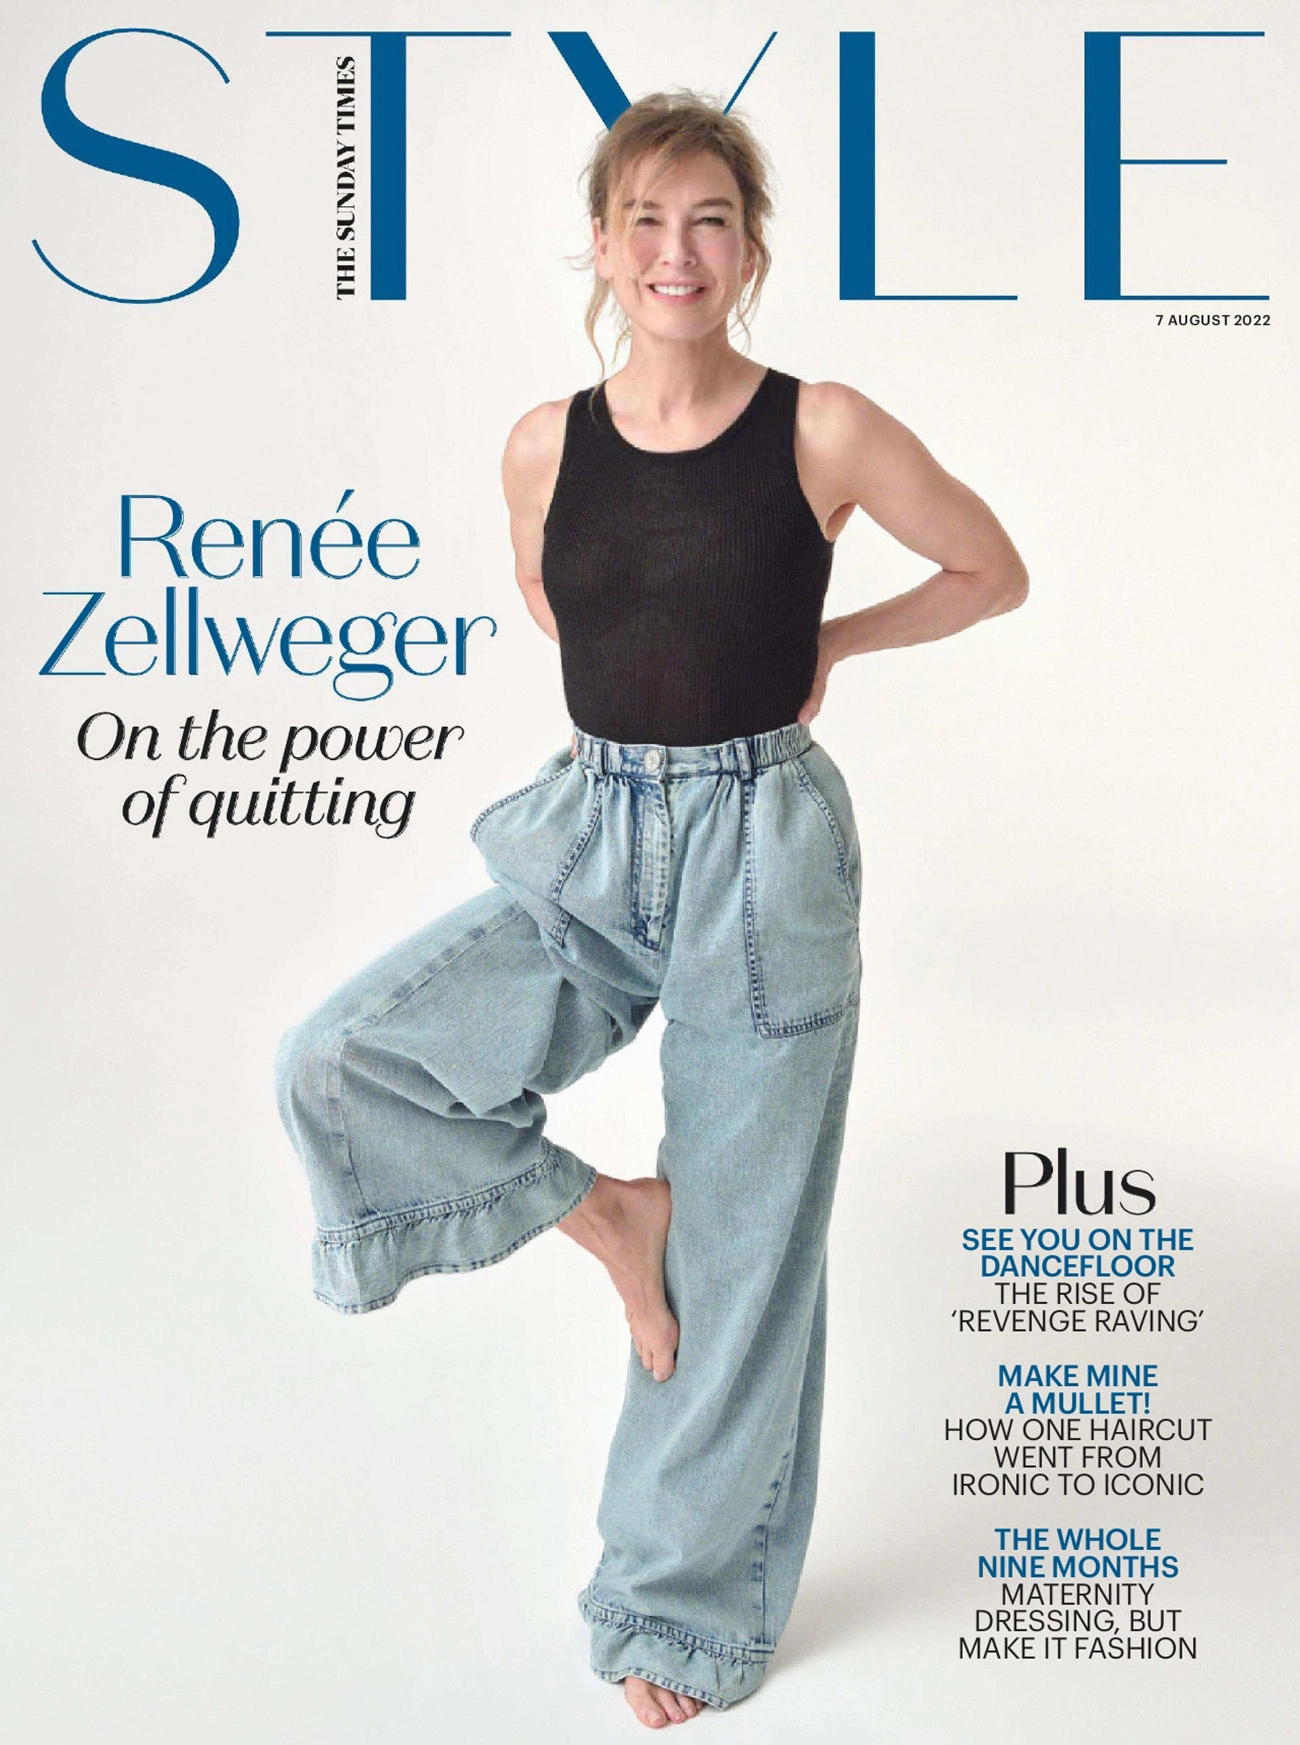 Renée Zellweger covers The Sunday Times Style August 7th, 2022 by Pamela Hanson